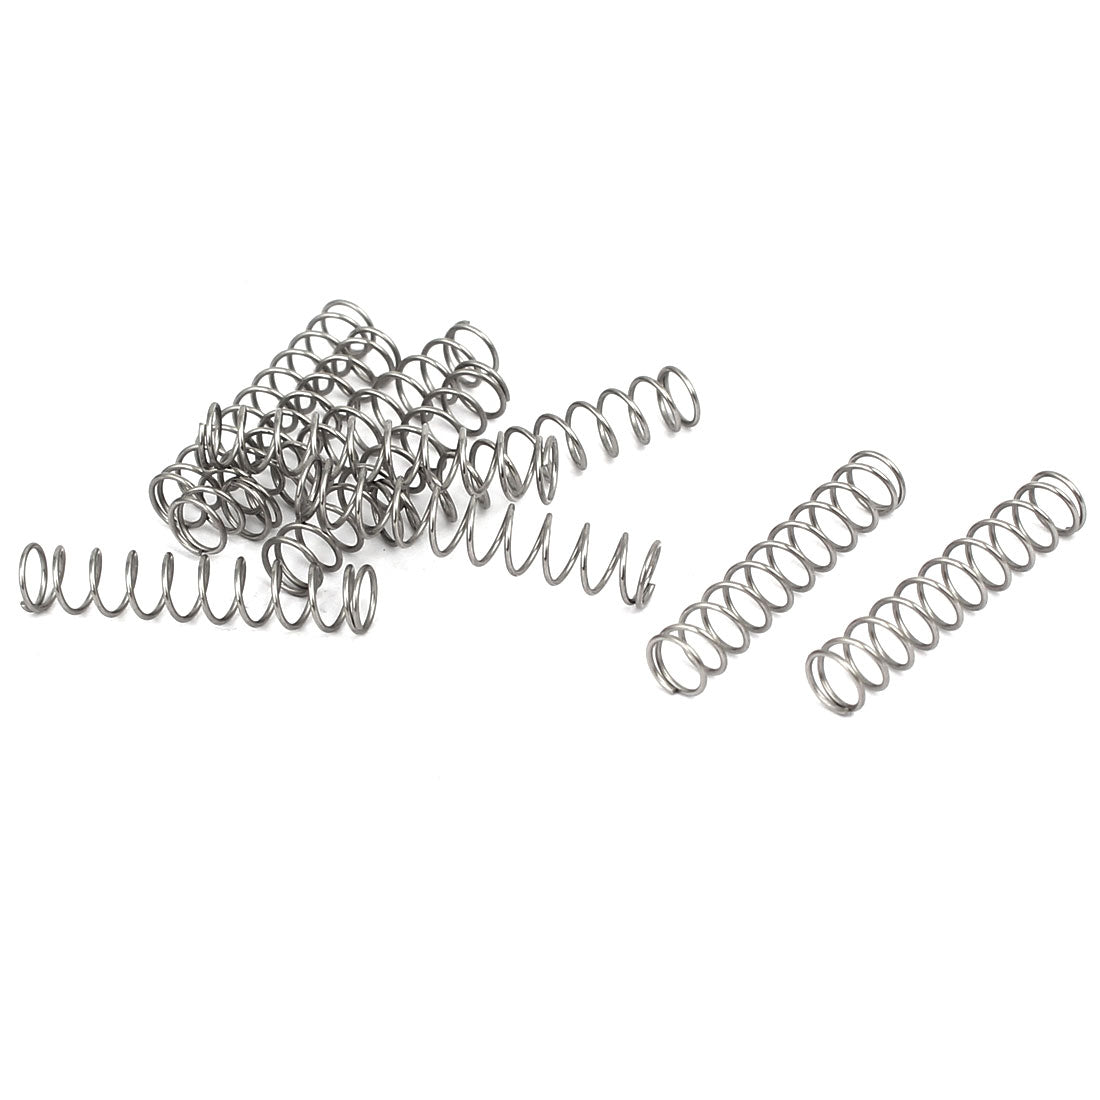 Aexit 0.6mmx6mmx50mm 304 Springs Stainless Steel Compression Springs Silver  Compression Springs Tone 10pcs